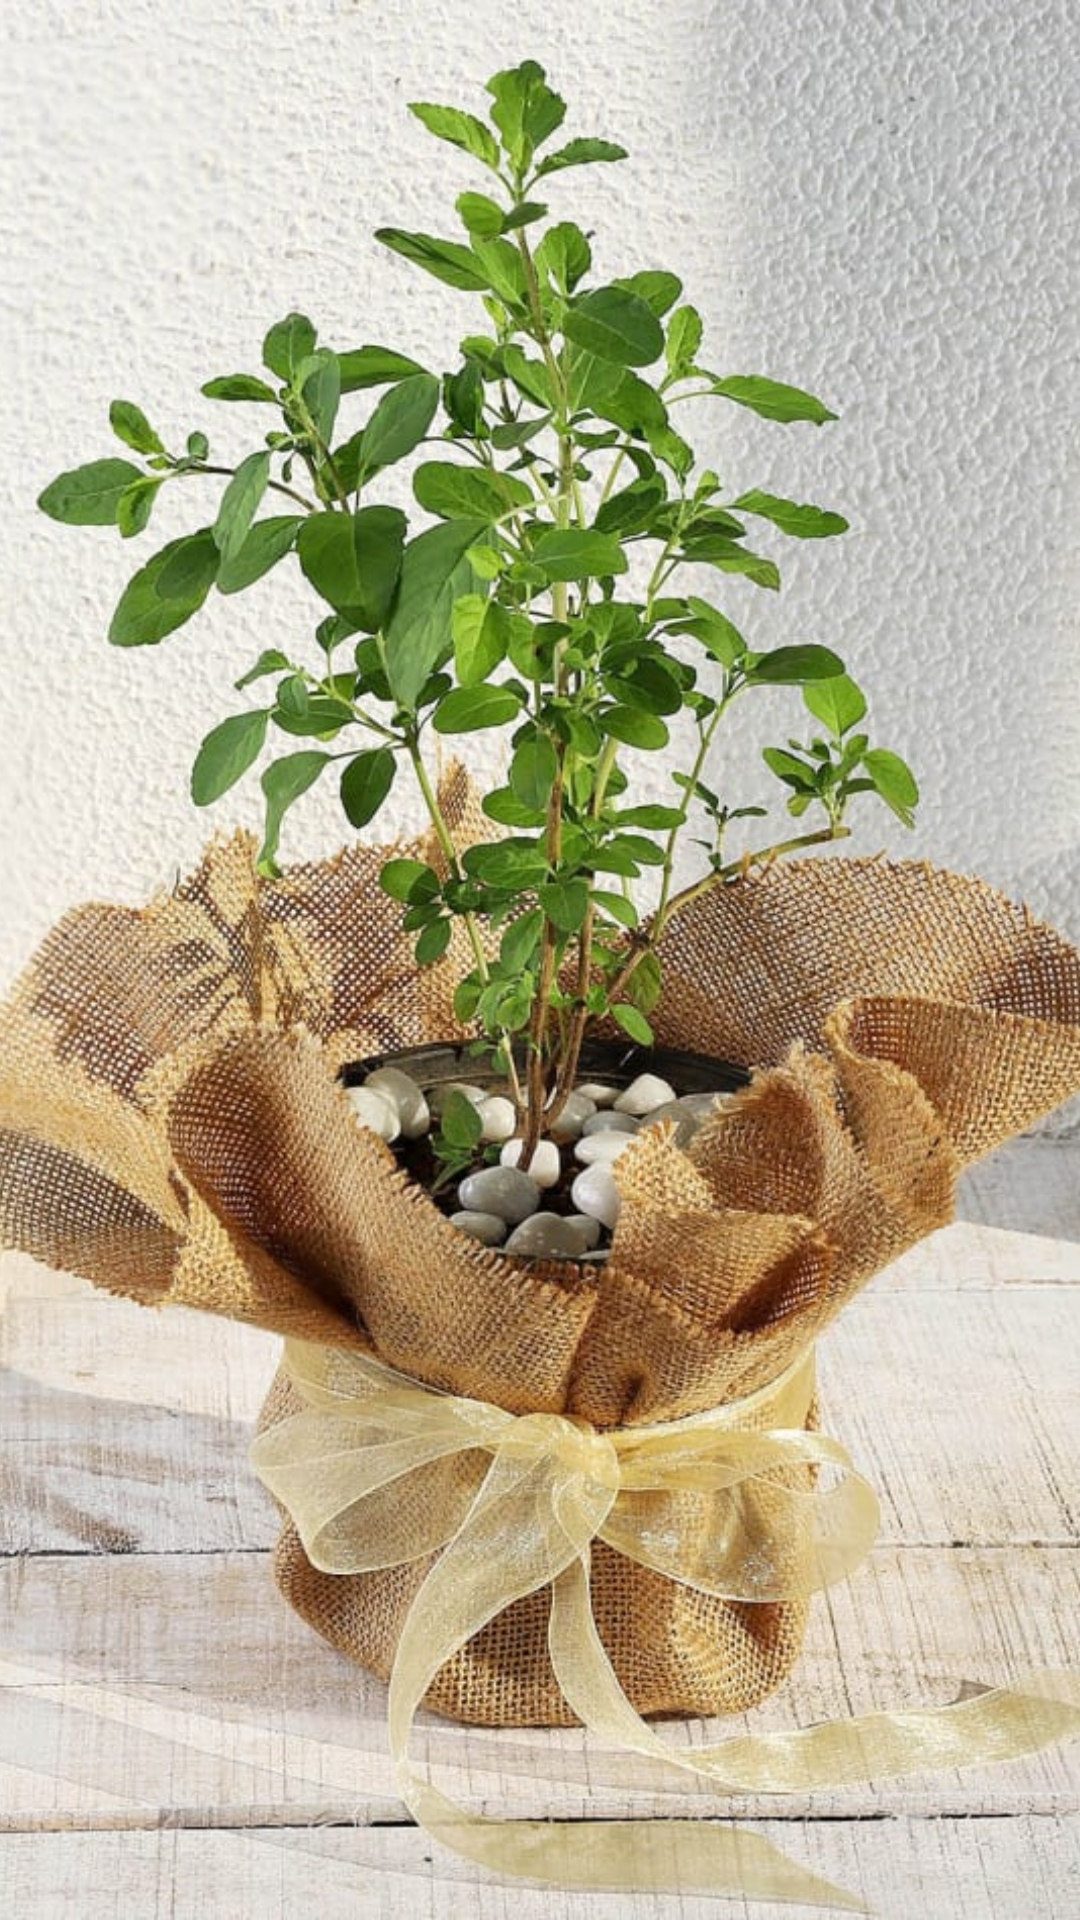 5 easy tips to keep your Tulsi plant healthy